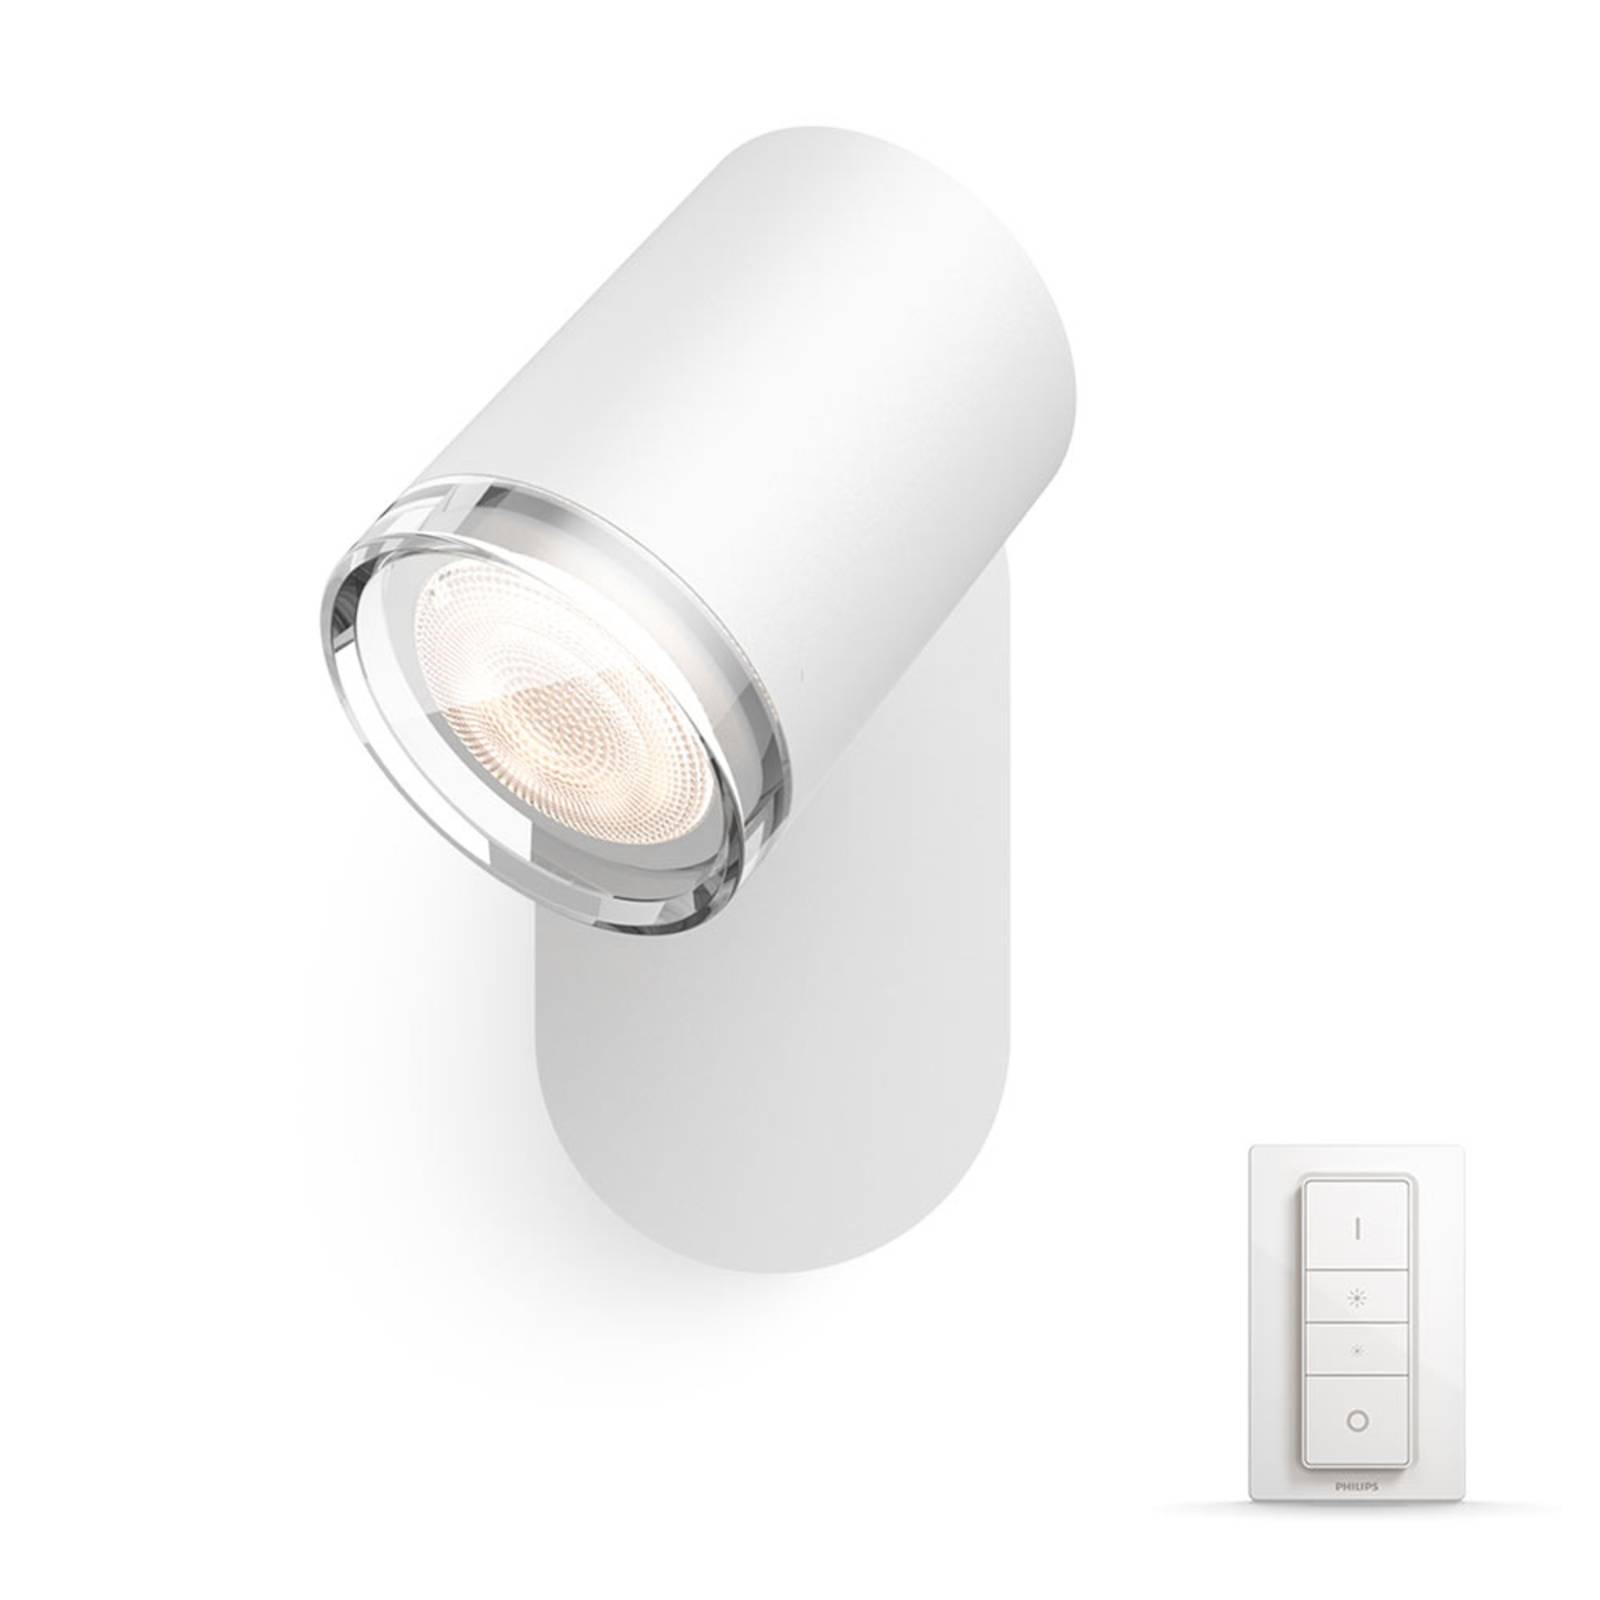 Philips Hue White Ambiance Adore LED-Spot